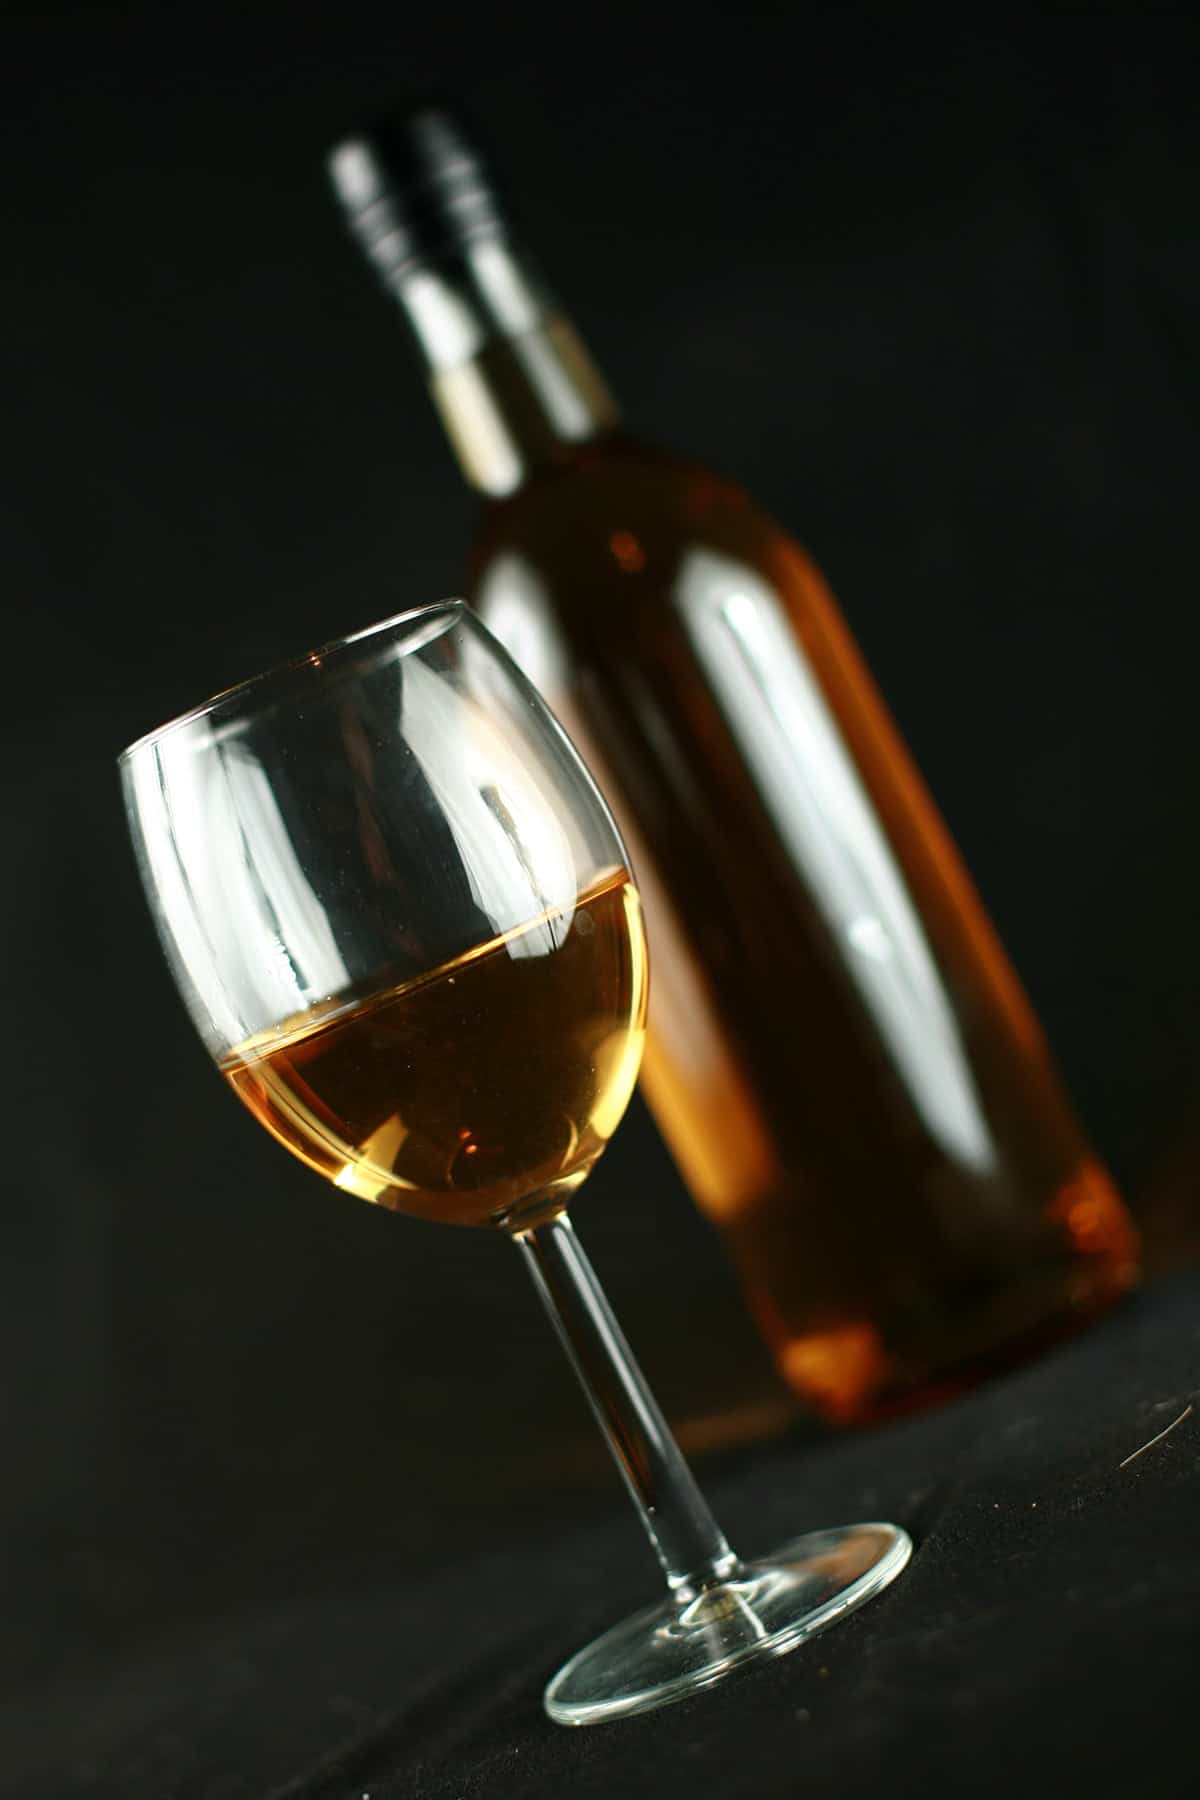 A wine glass and a wine bottle are filled with golden banana wine, against a black background.